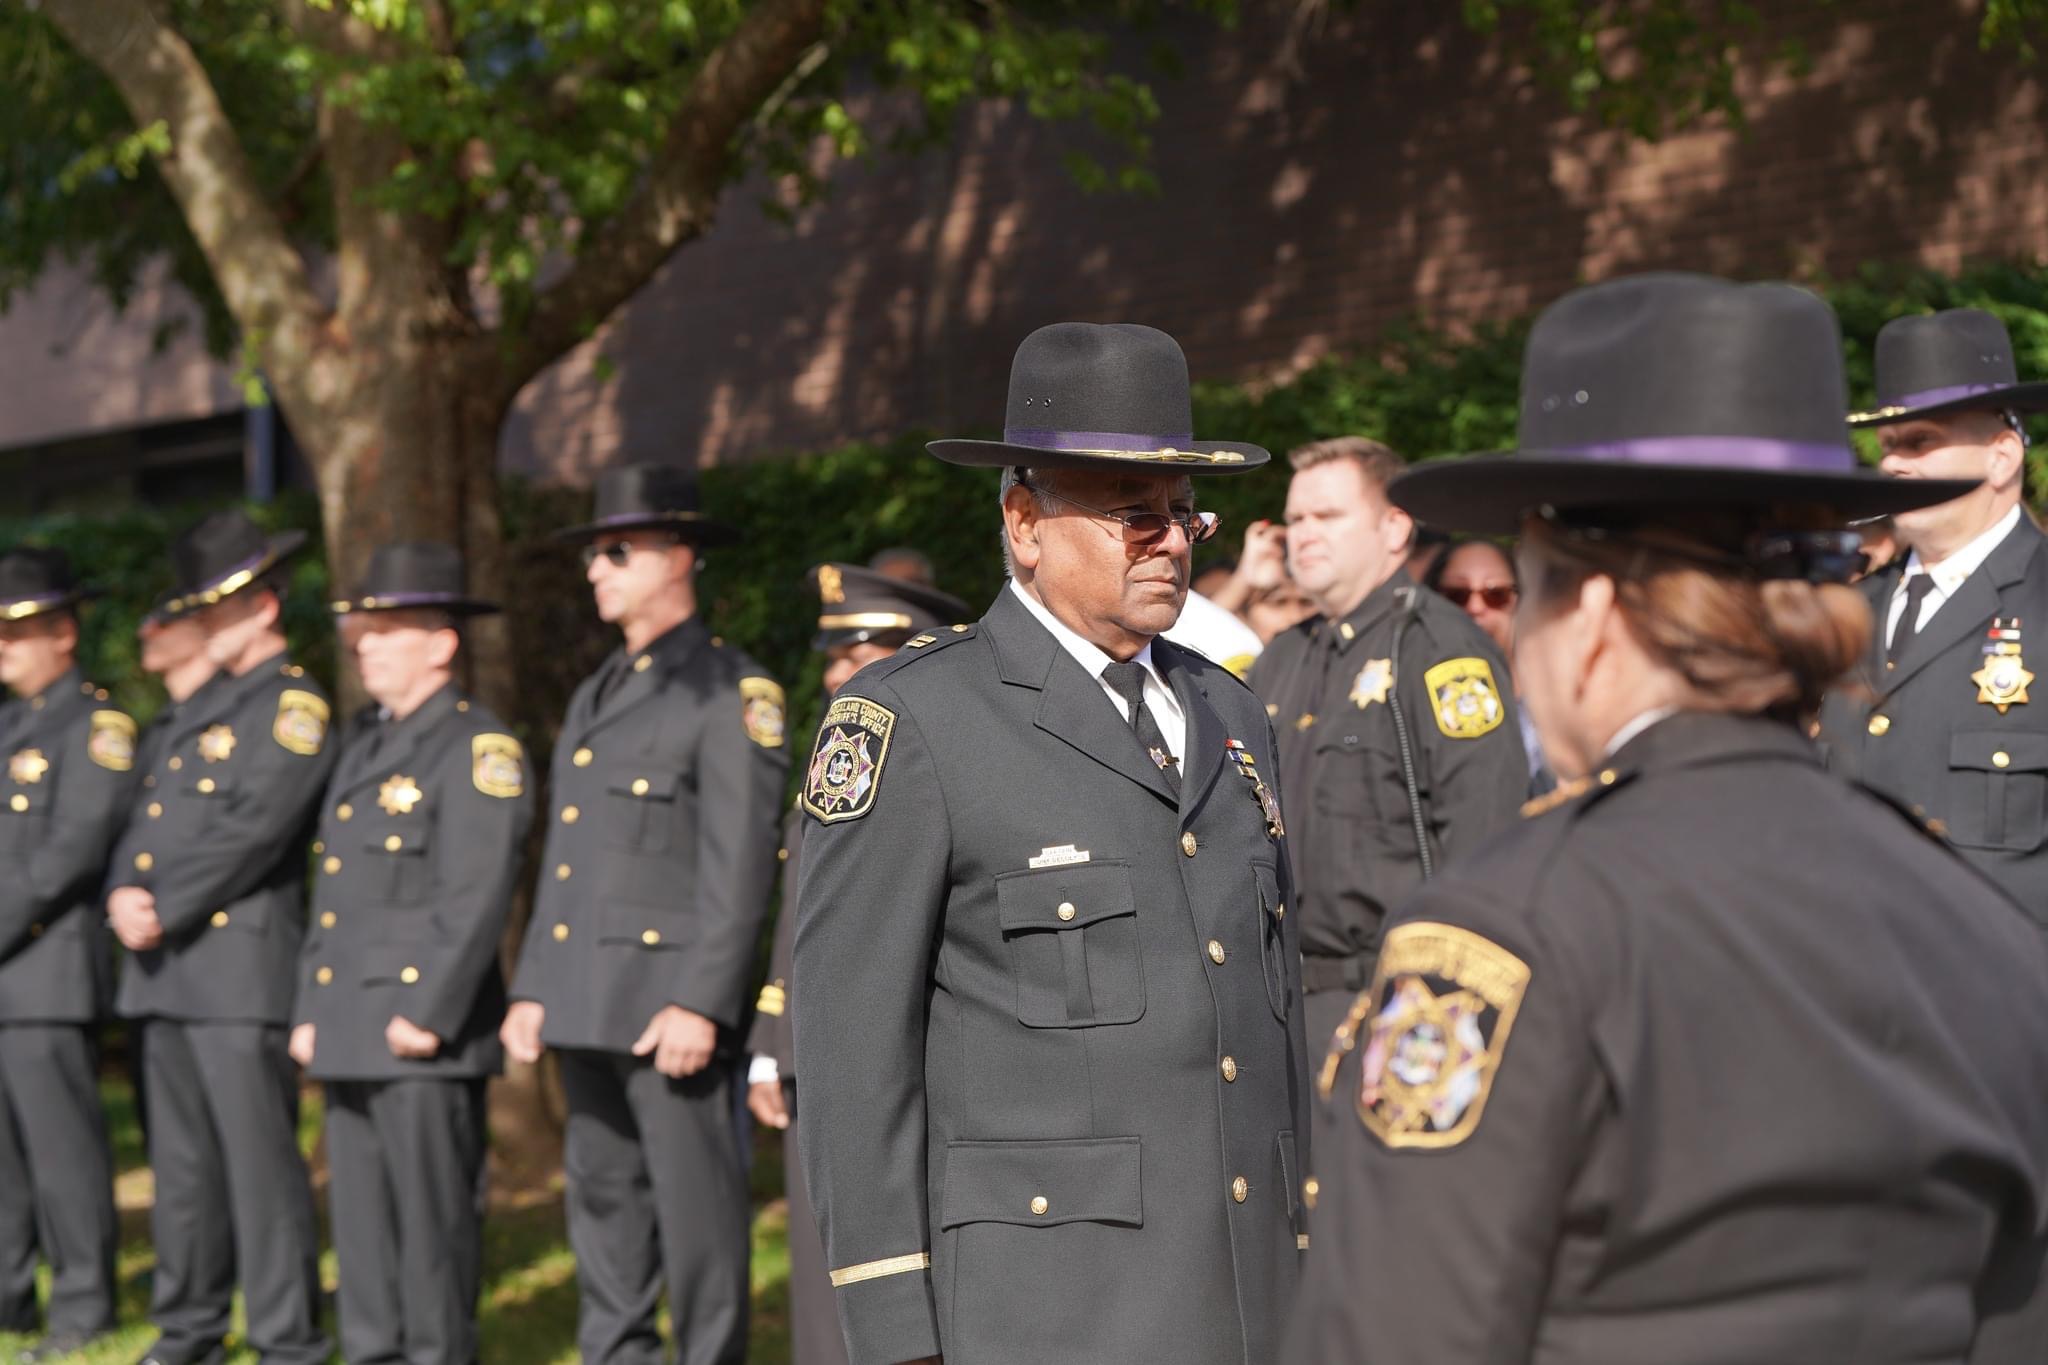 Officers wearing their uniforms